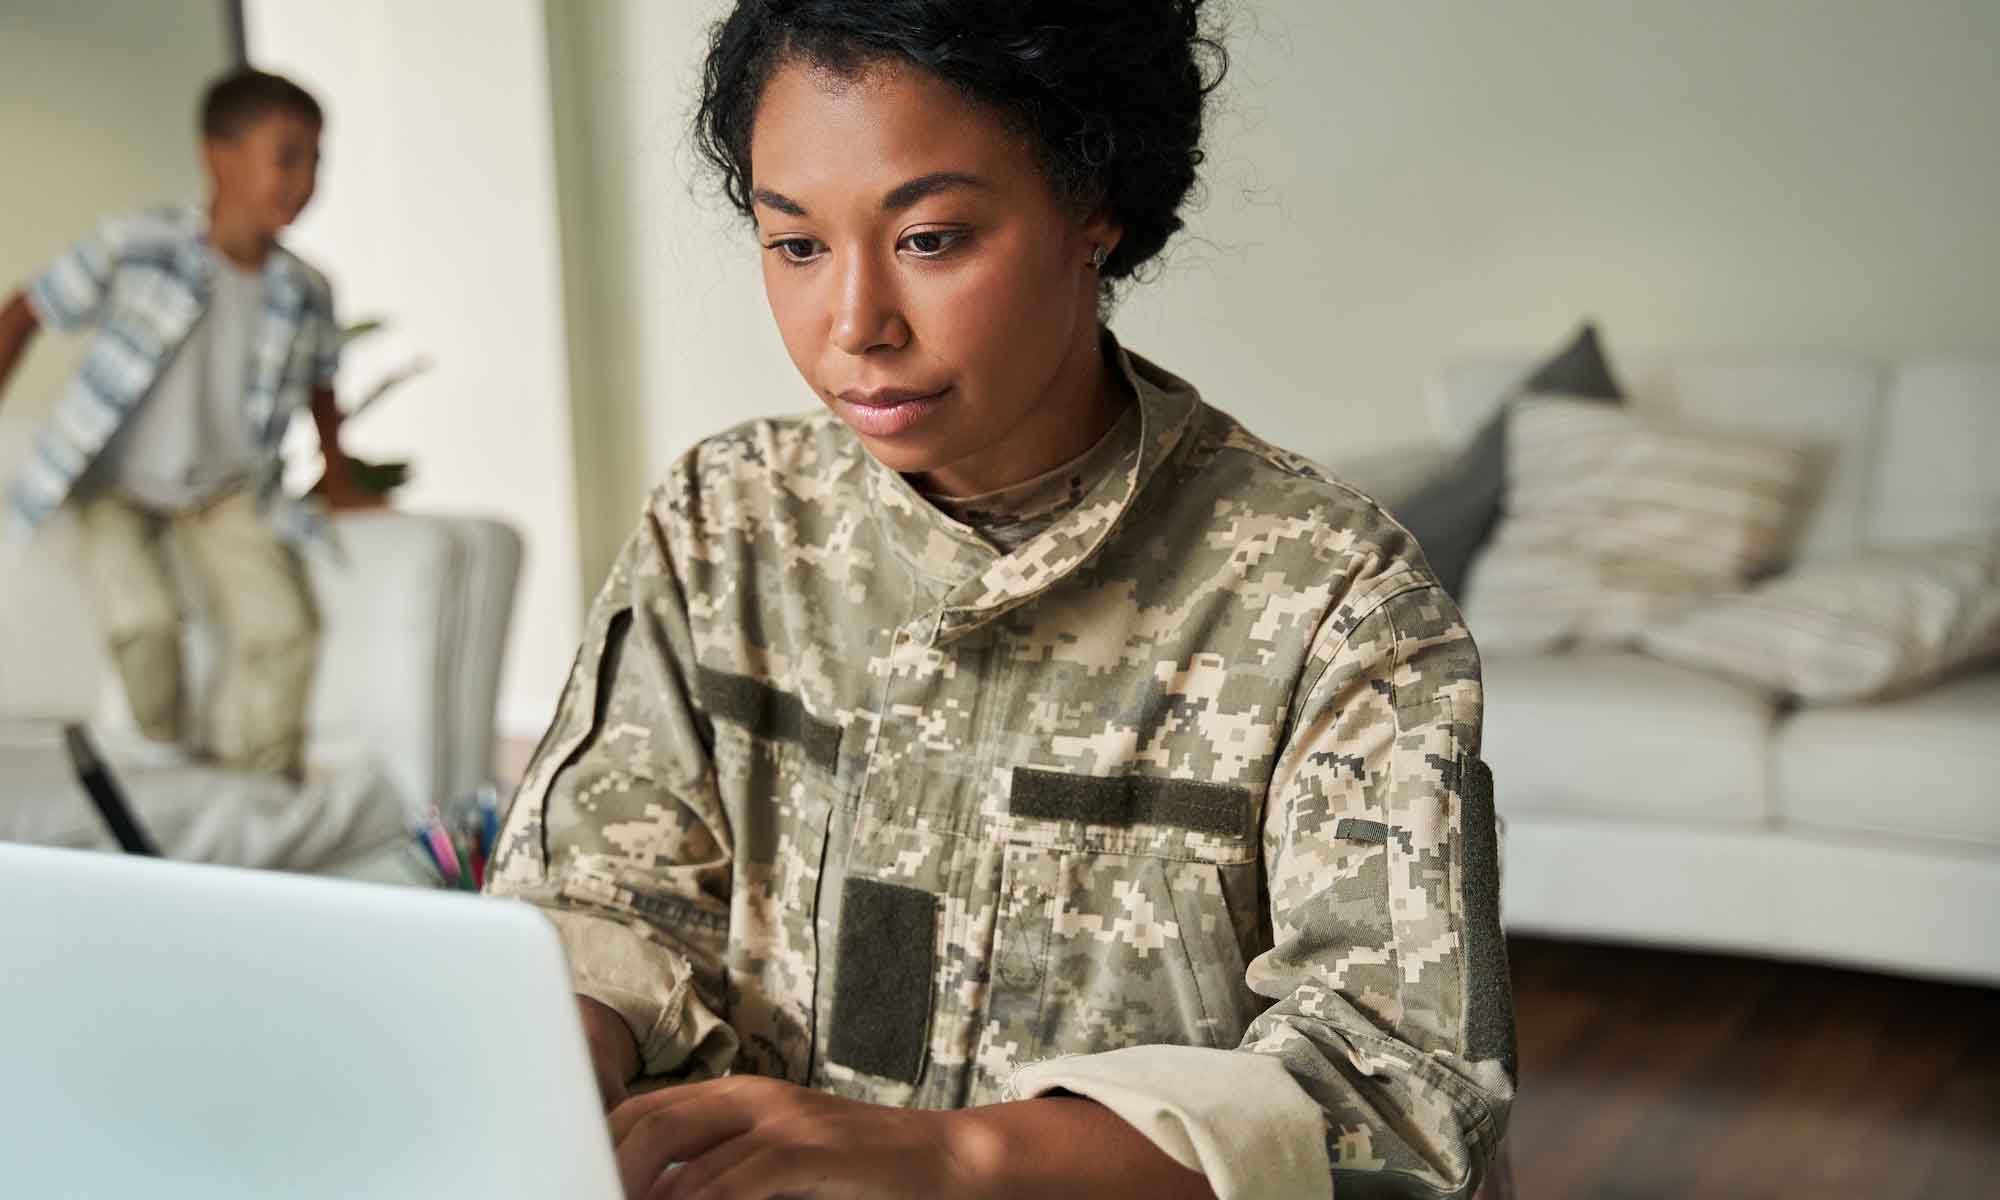 Military person working on laptop in livingroom